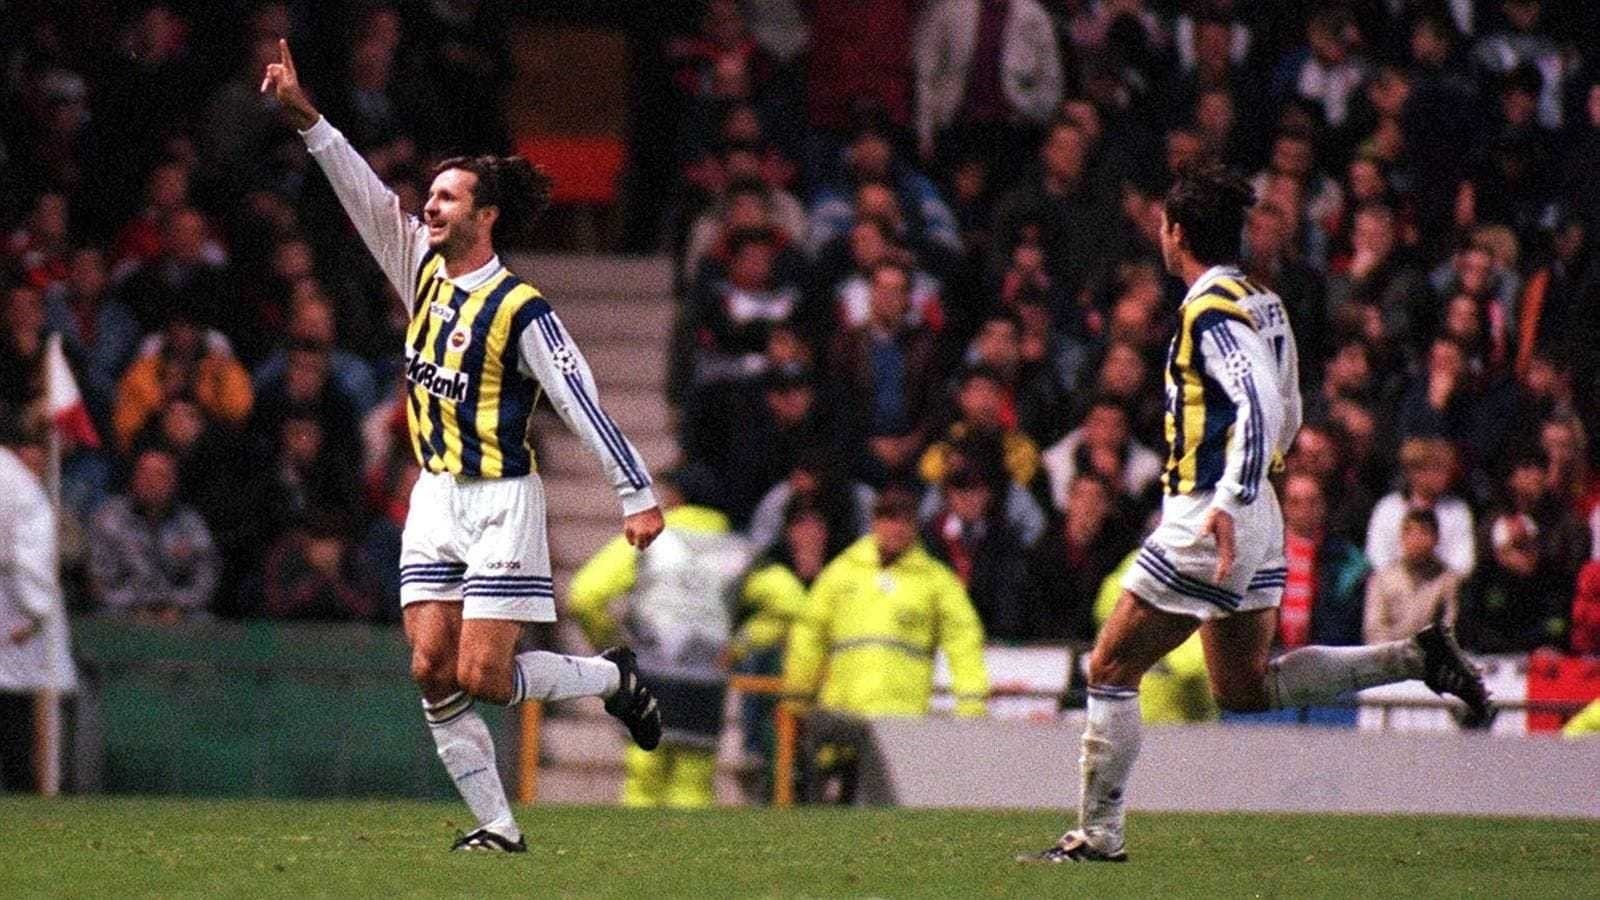 In the 1996/97 group stage, Sebastiao Lazaroni's Fenerbahu00e7e lost 2-0 at home to Sir Alex Ferguson's United but won the return fixture 1-0 thanks to Elvir Bolic's goal - the Red Devils' first ever UEFA home defeat.